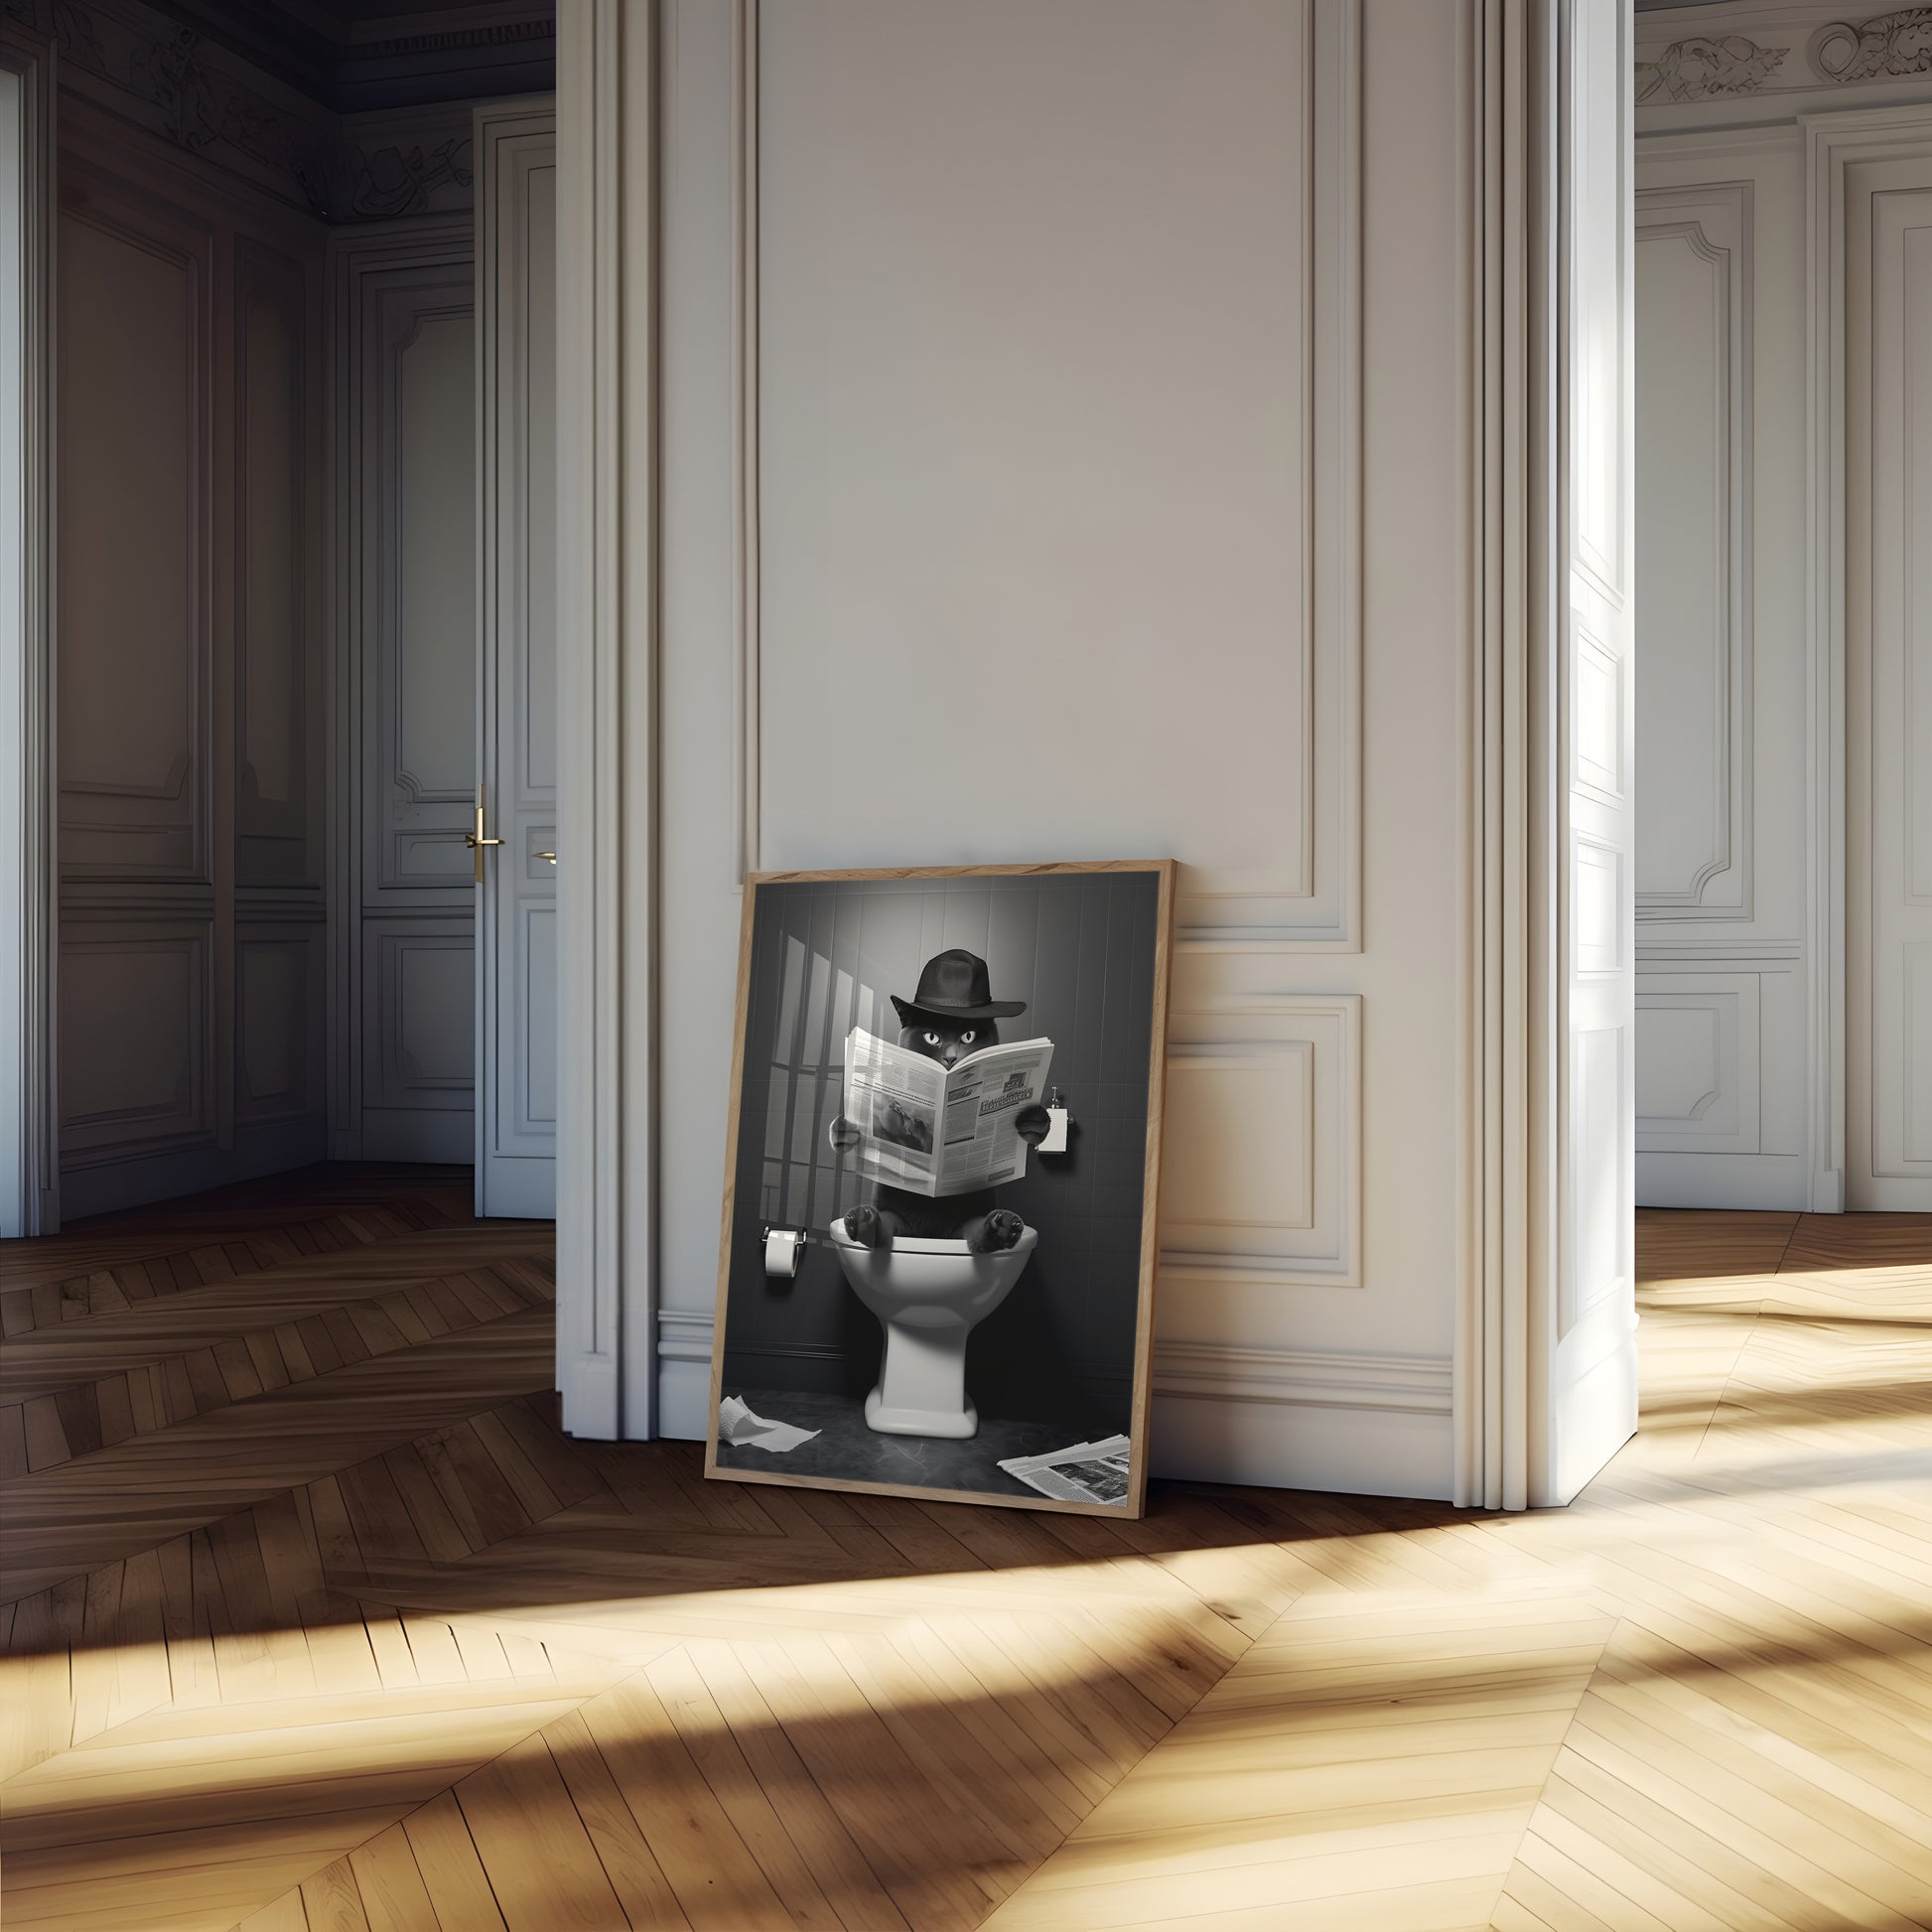 Elegant room with a canvas of a robot sitting on a toilet placed against the wall.